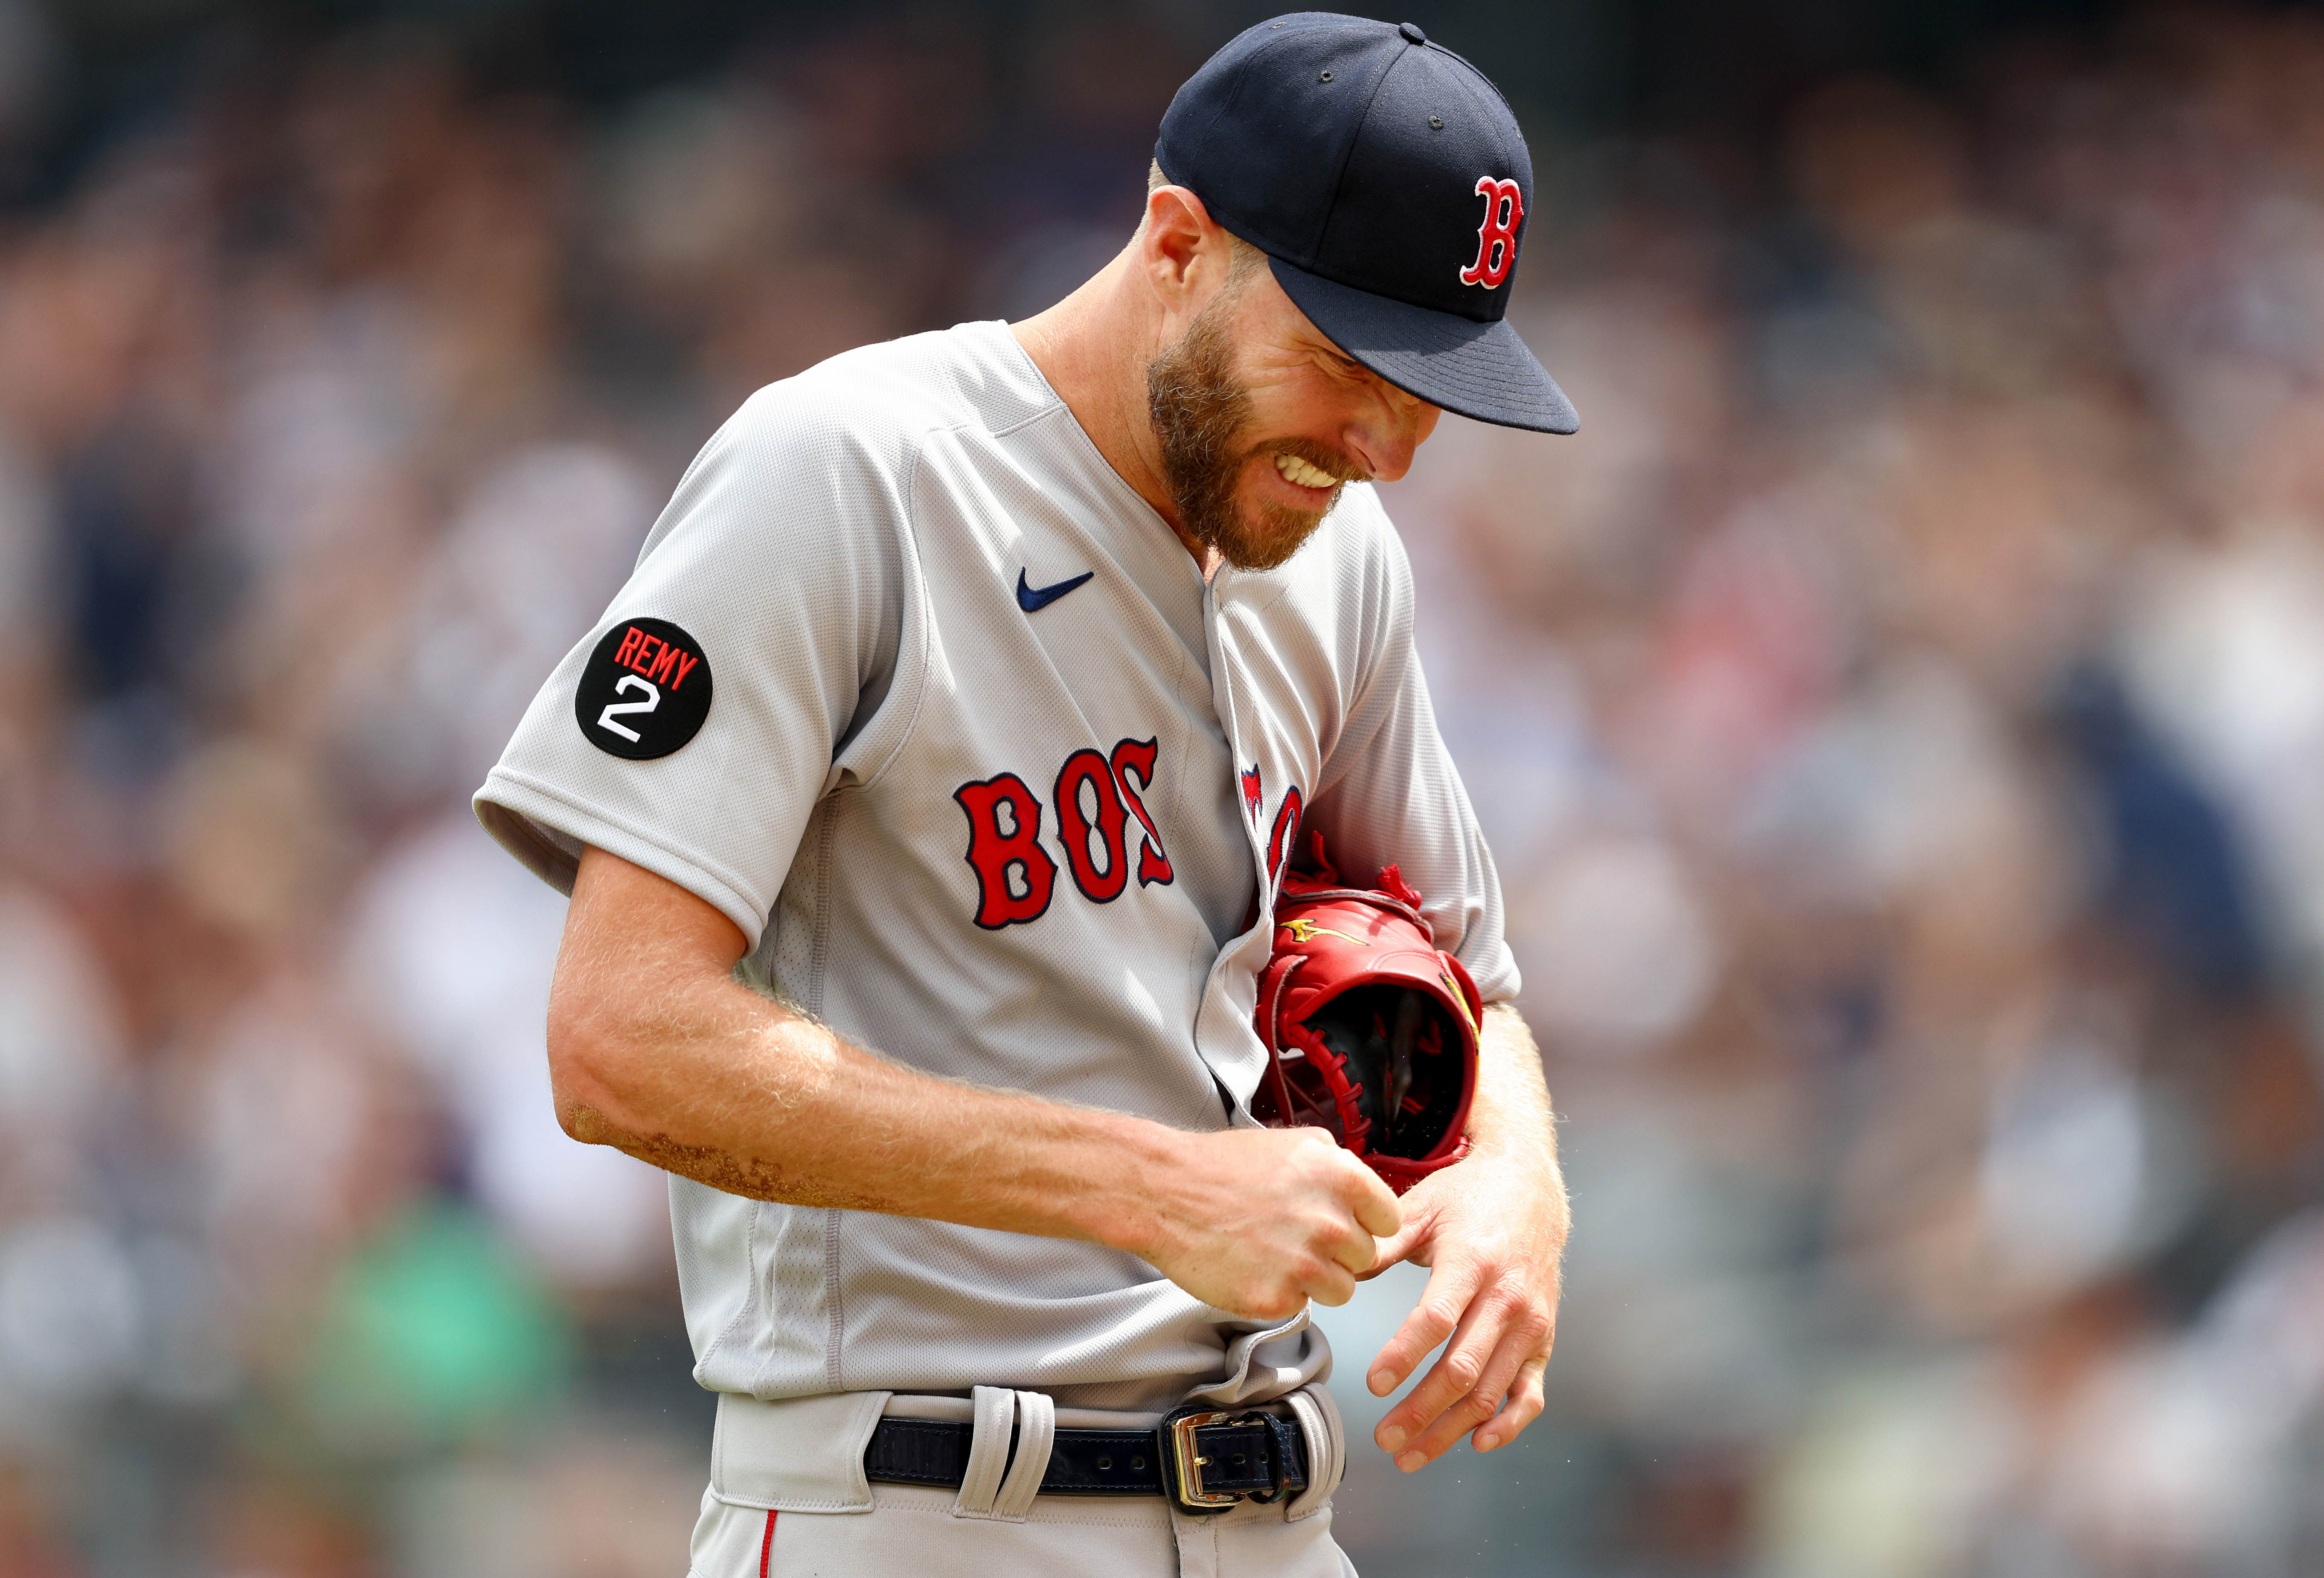 Chris Sale says he's 'learned' from bizarre jersey cutting incident:  'Hopefully it's made me a better person' – New York Daily News